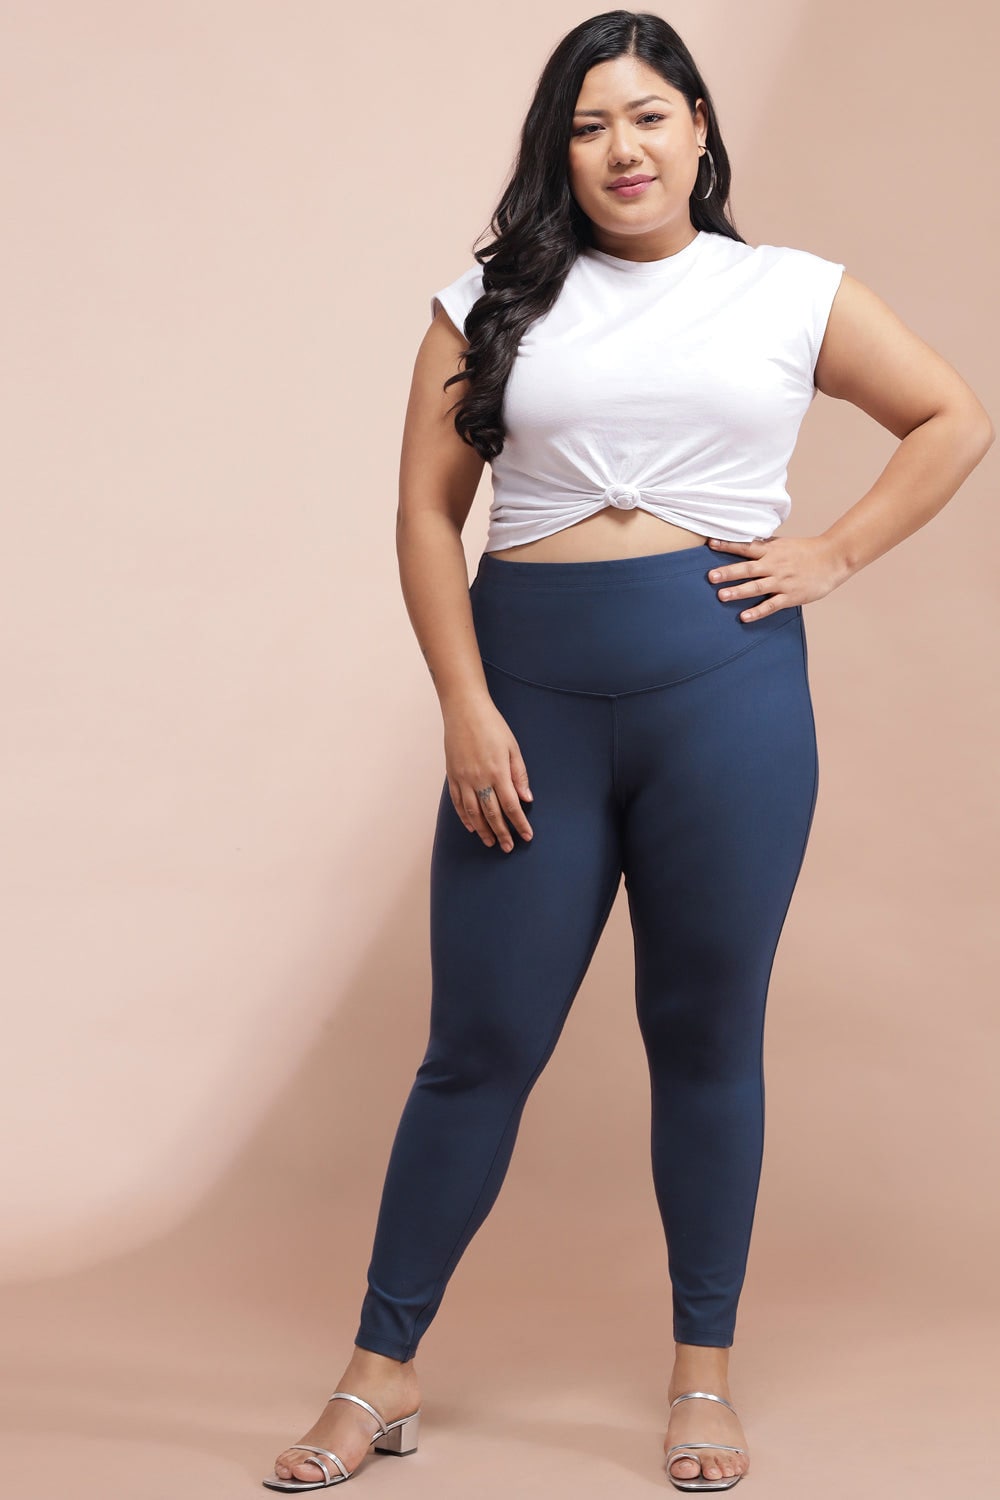 Plus size womens gym pants for workout and yoga